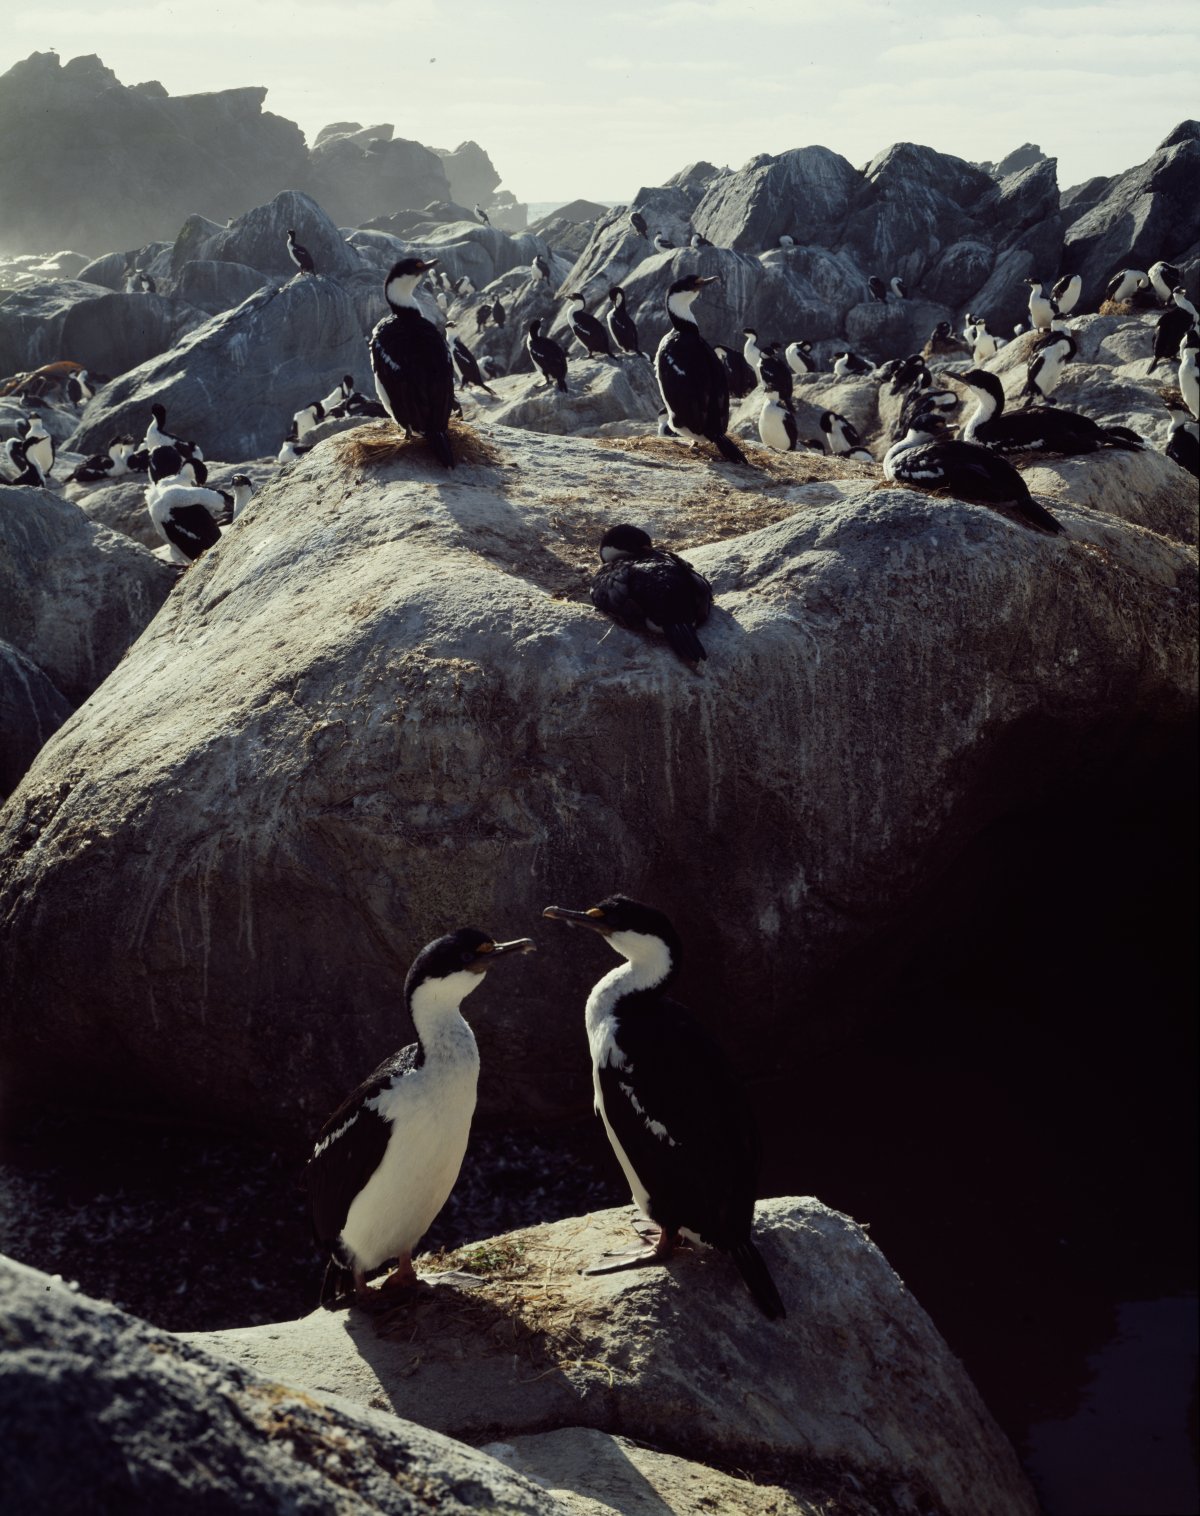 A large number of black and white shags sit on various boulders. The boulders are covered with bird droppings. 